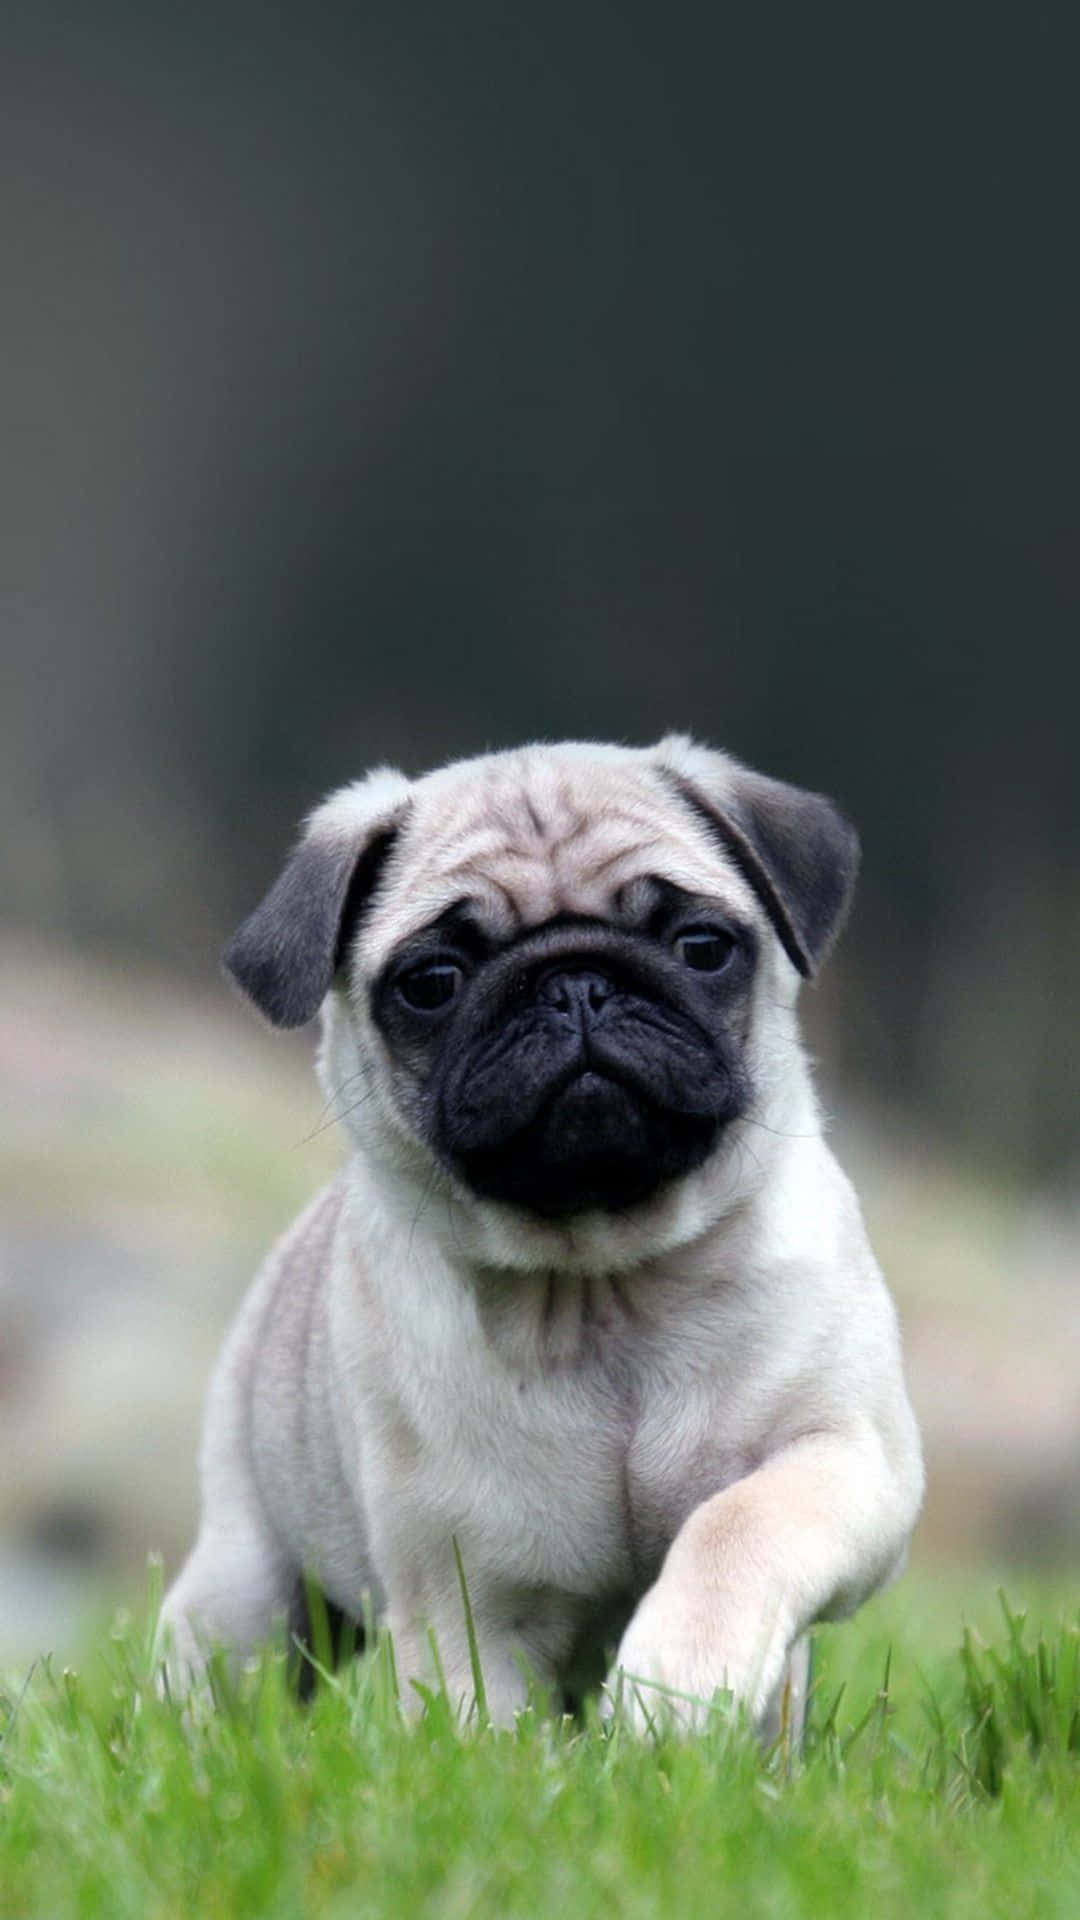 This sweet pug is ready for its closeup! Wallpaper